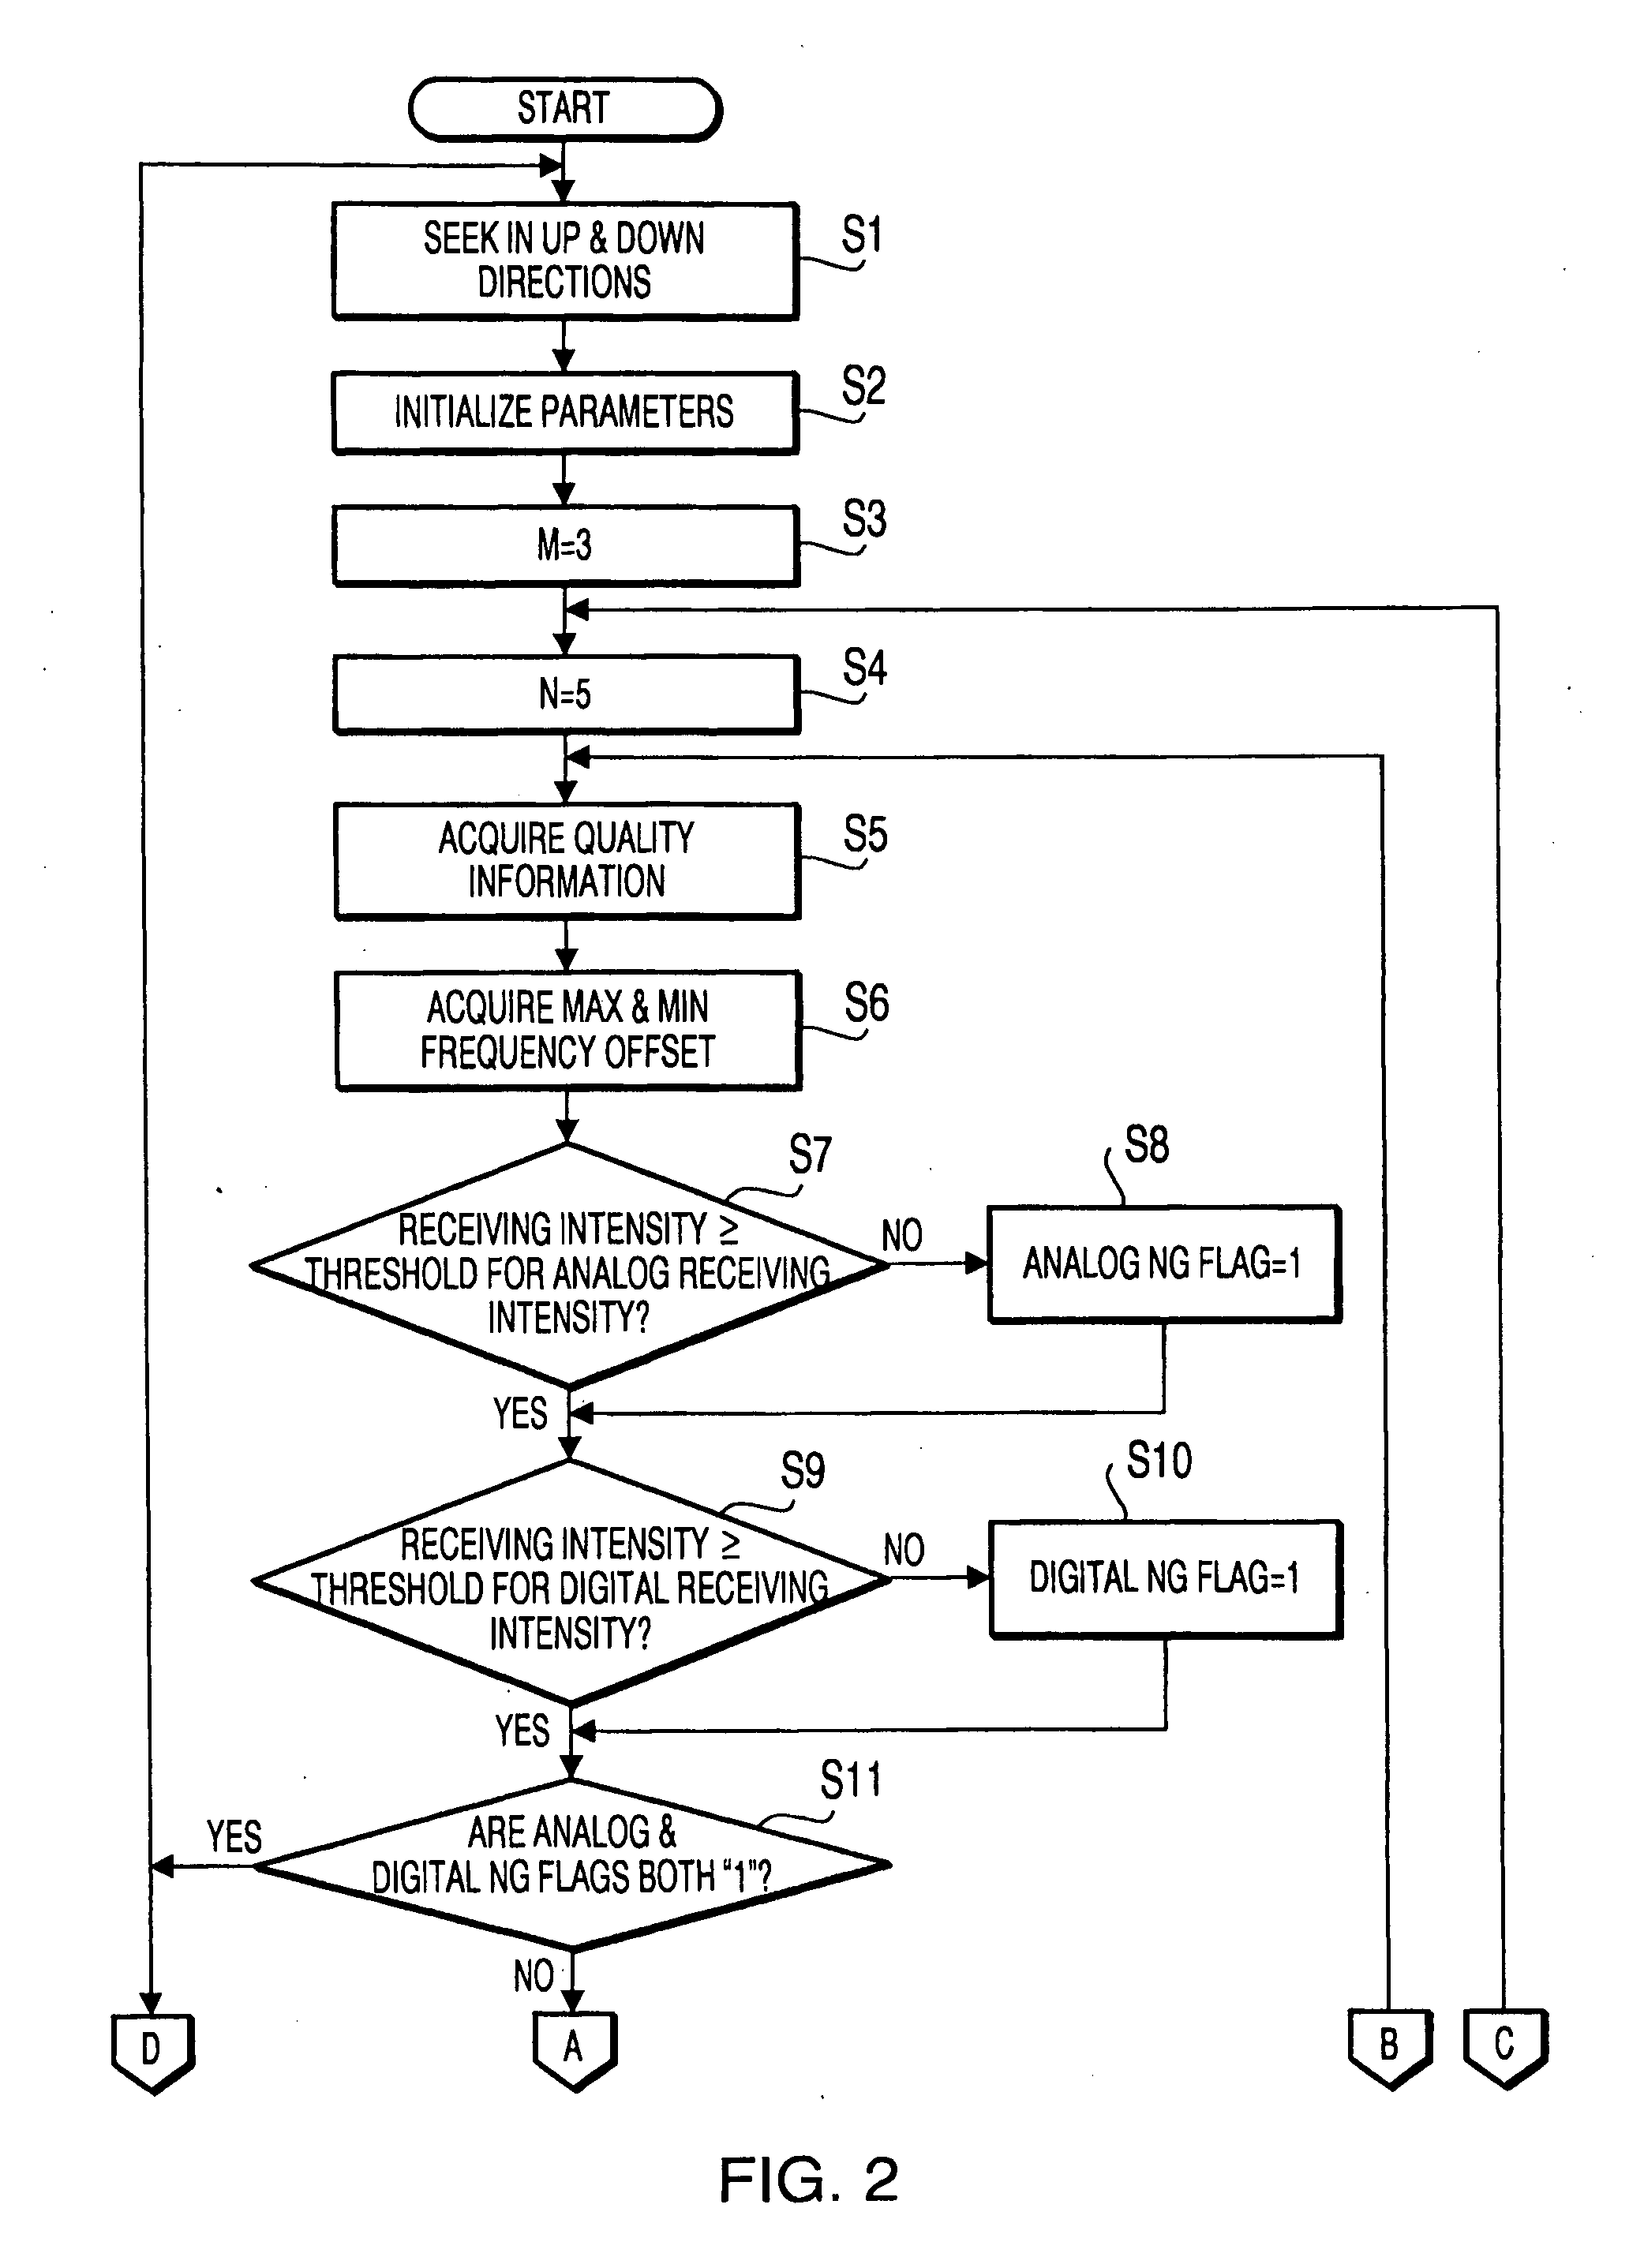 Broadcast receiver and broadcast channel seek method